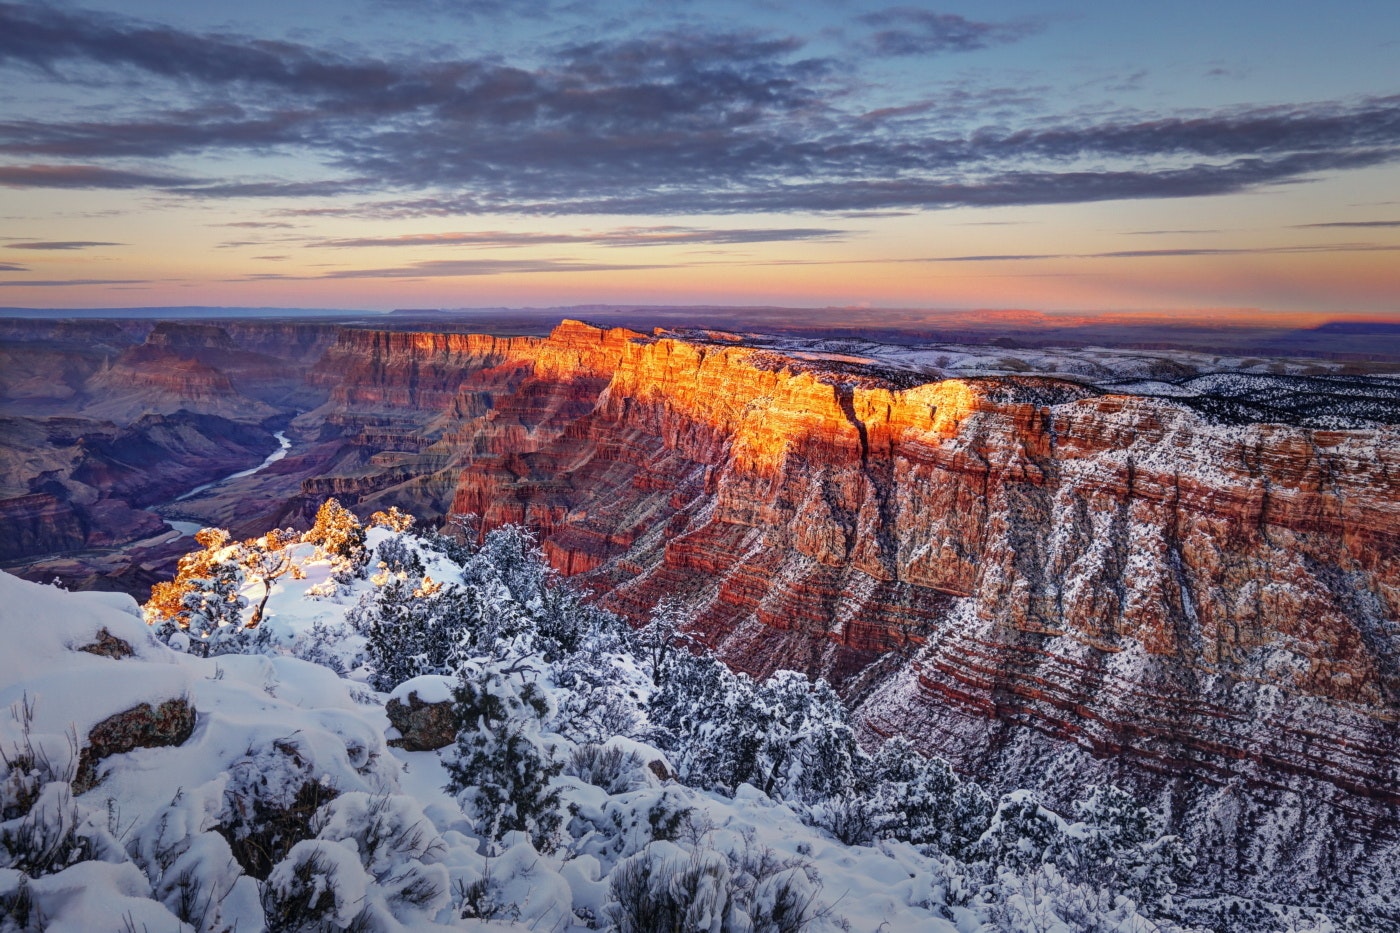 The Grand Canyon dusted with snow, Arizona